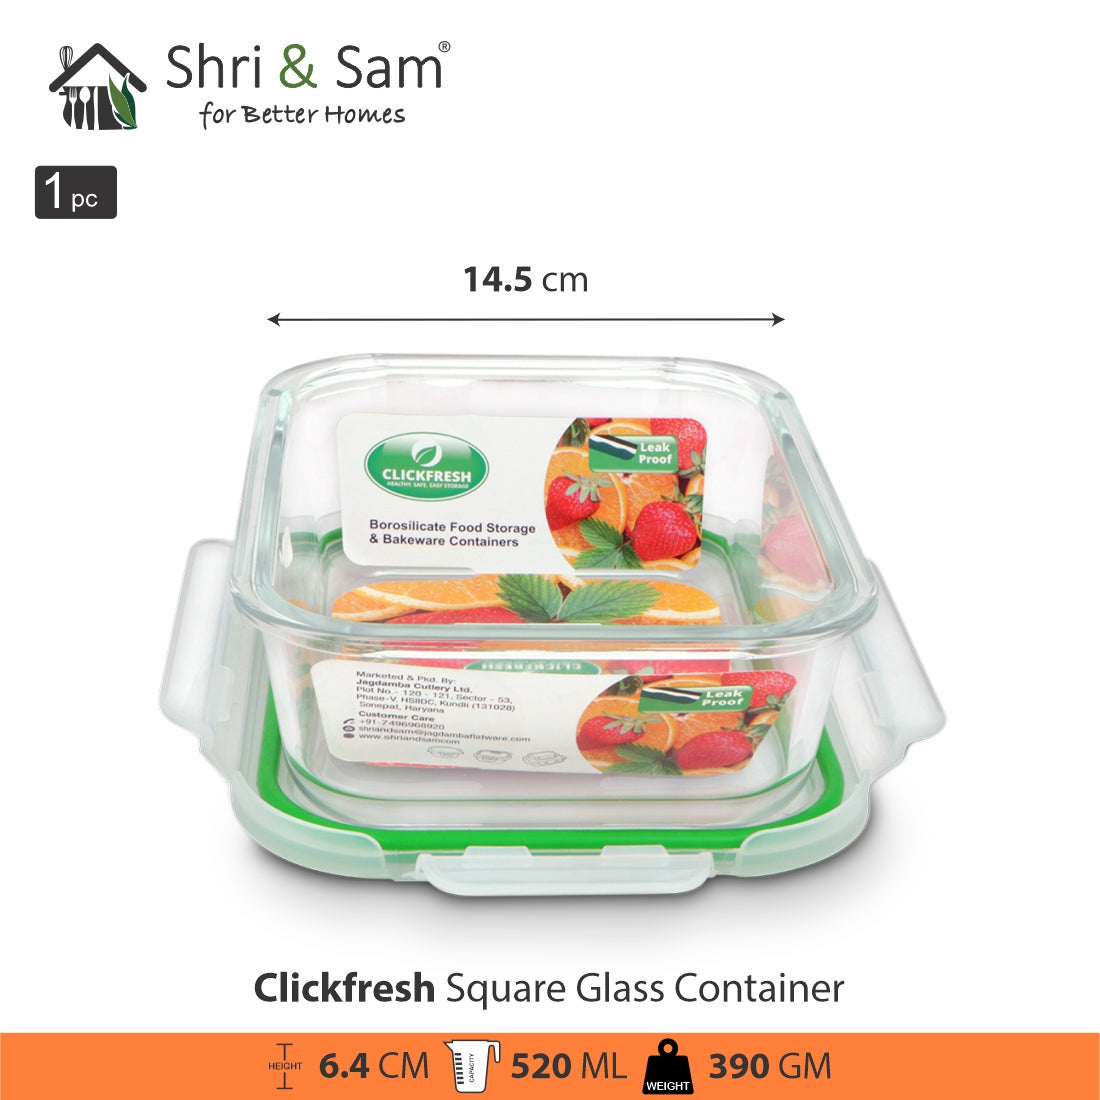 Glass 520ml Food Storage & Bakeware Container with Airtight Lid Square Clickfresh